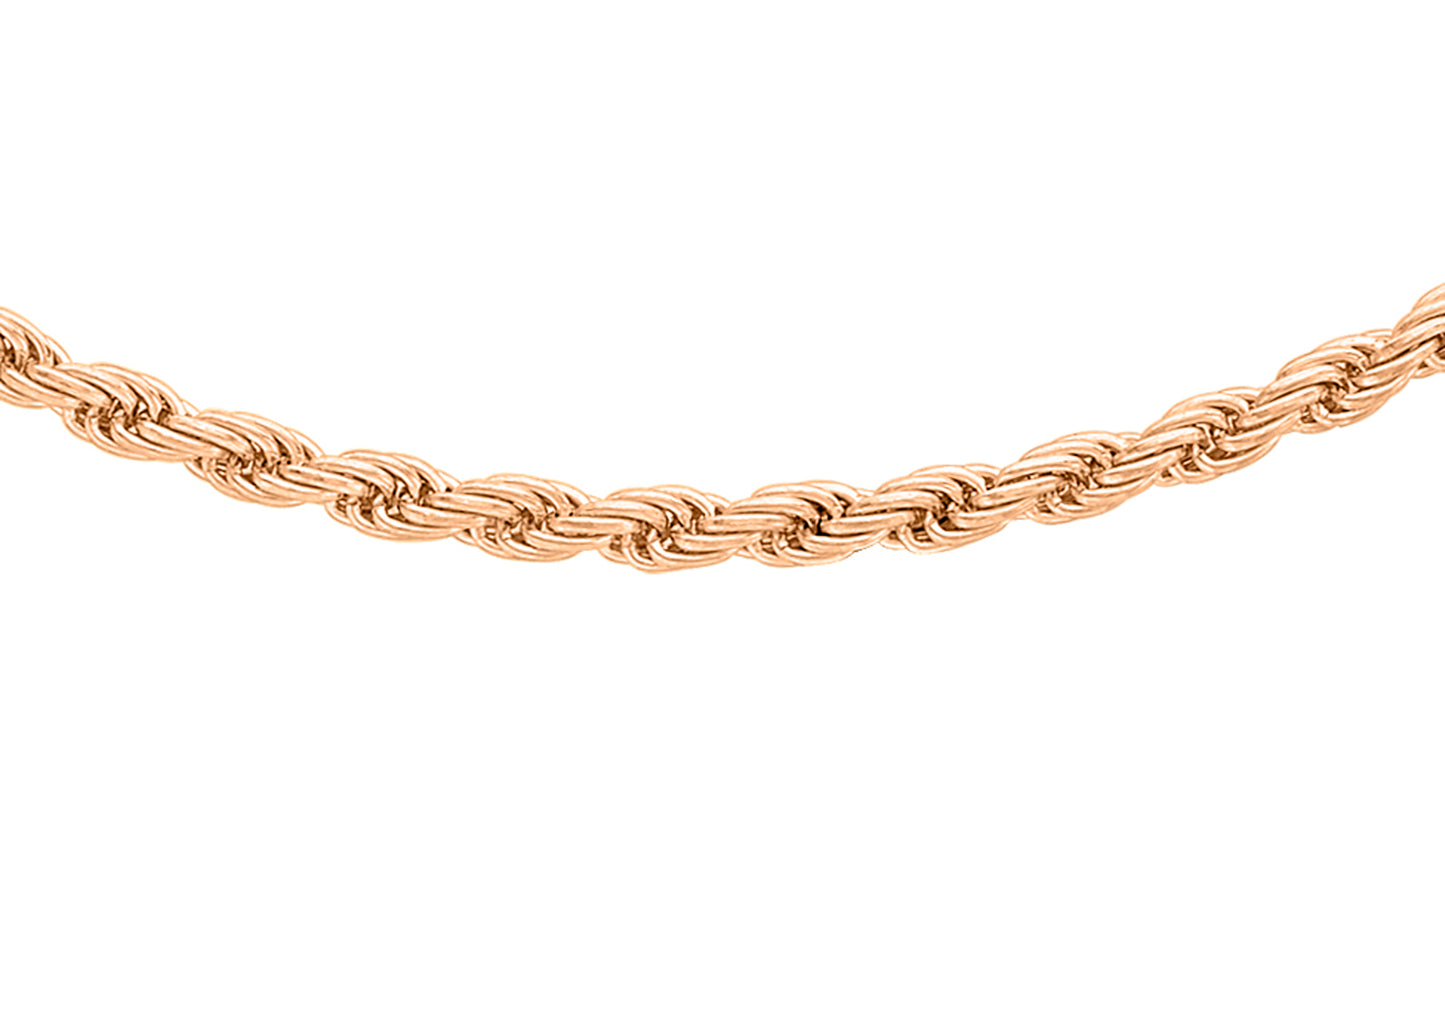 9K Rose Gold 1.5mm Rope Chain 16"